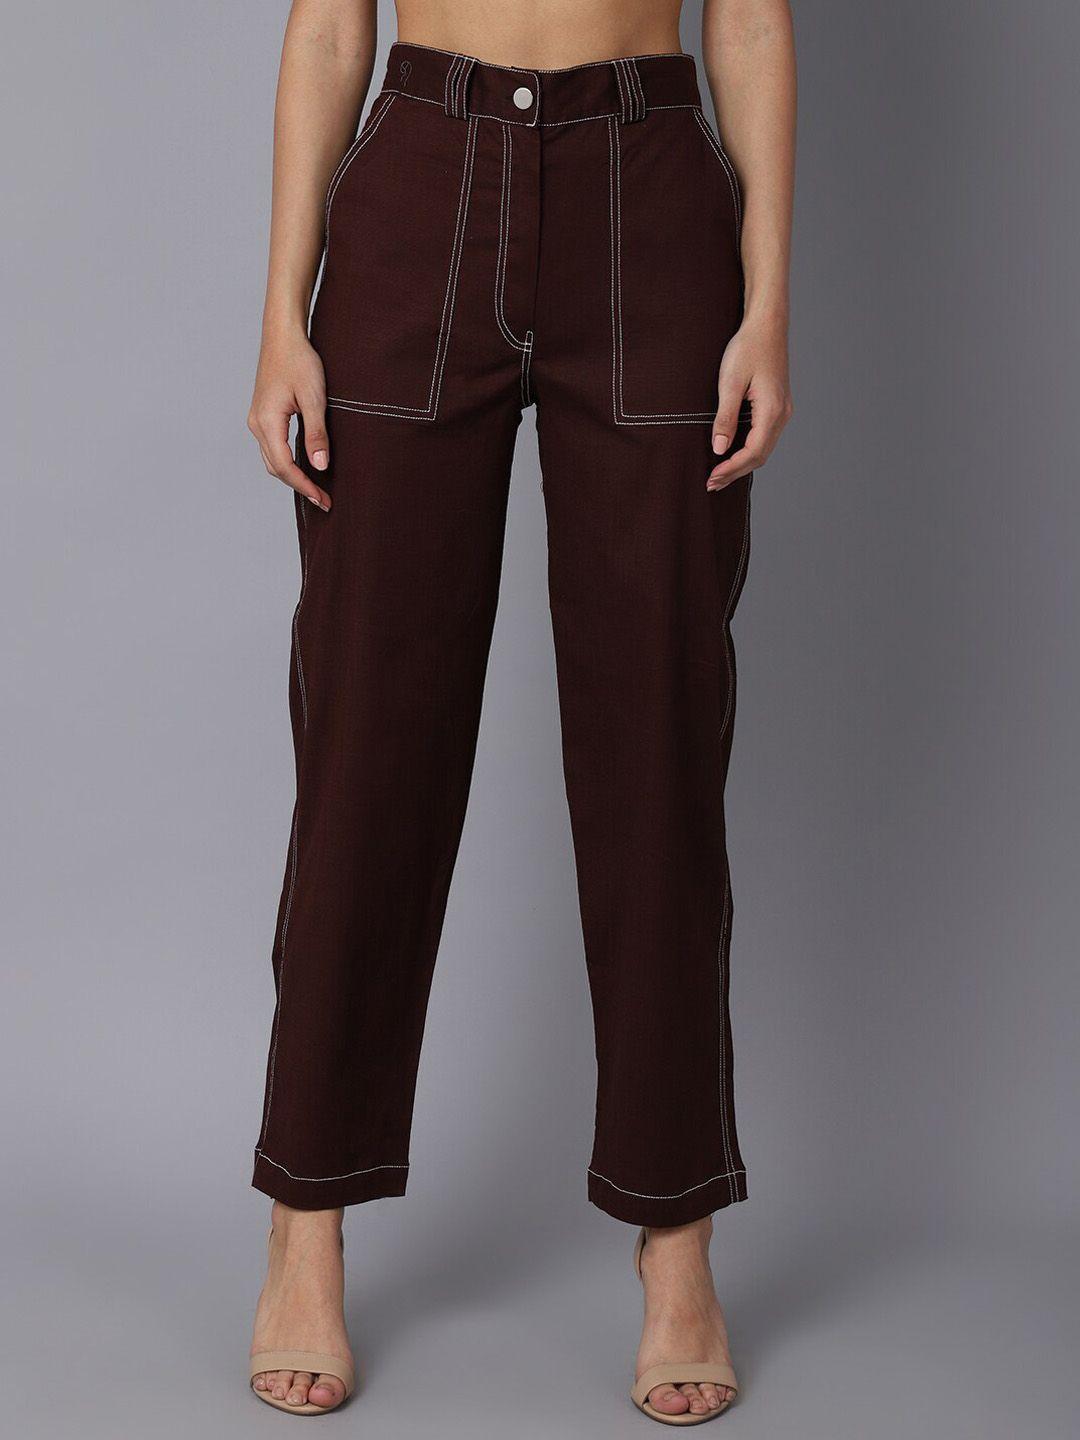 tag 7 women brown smart straight fit trousers